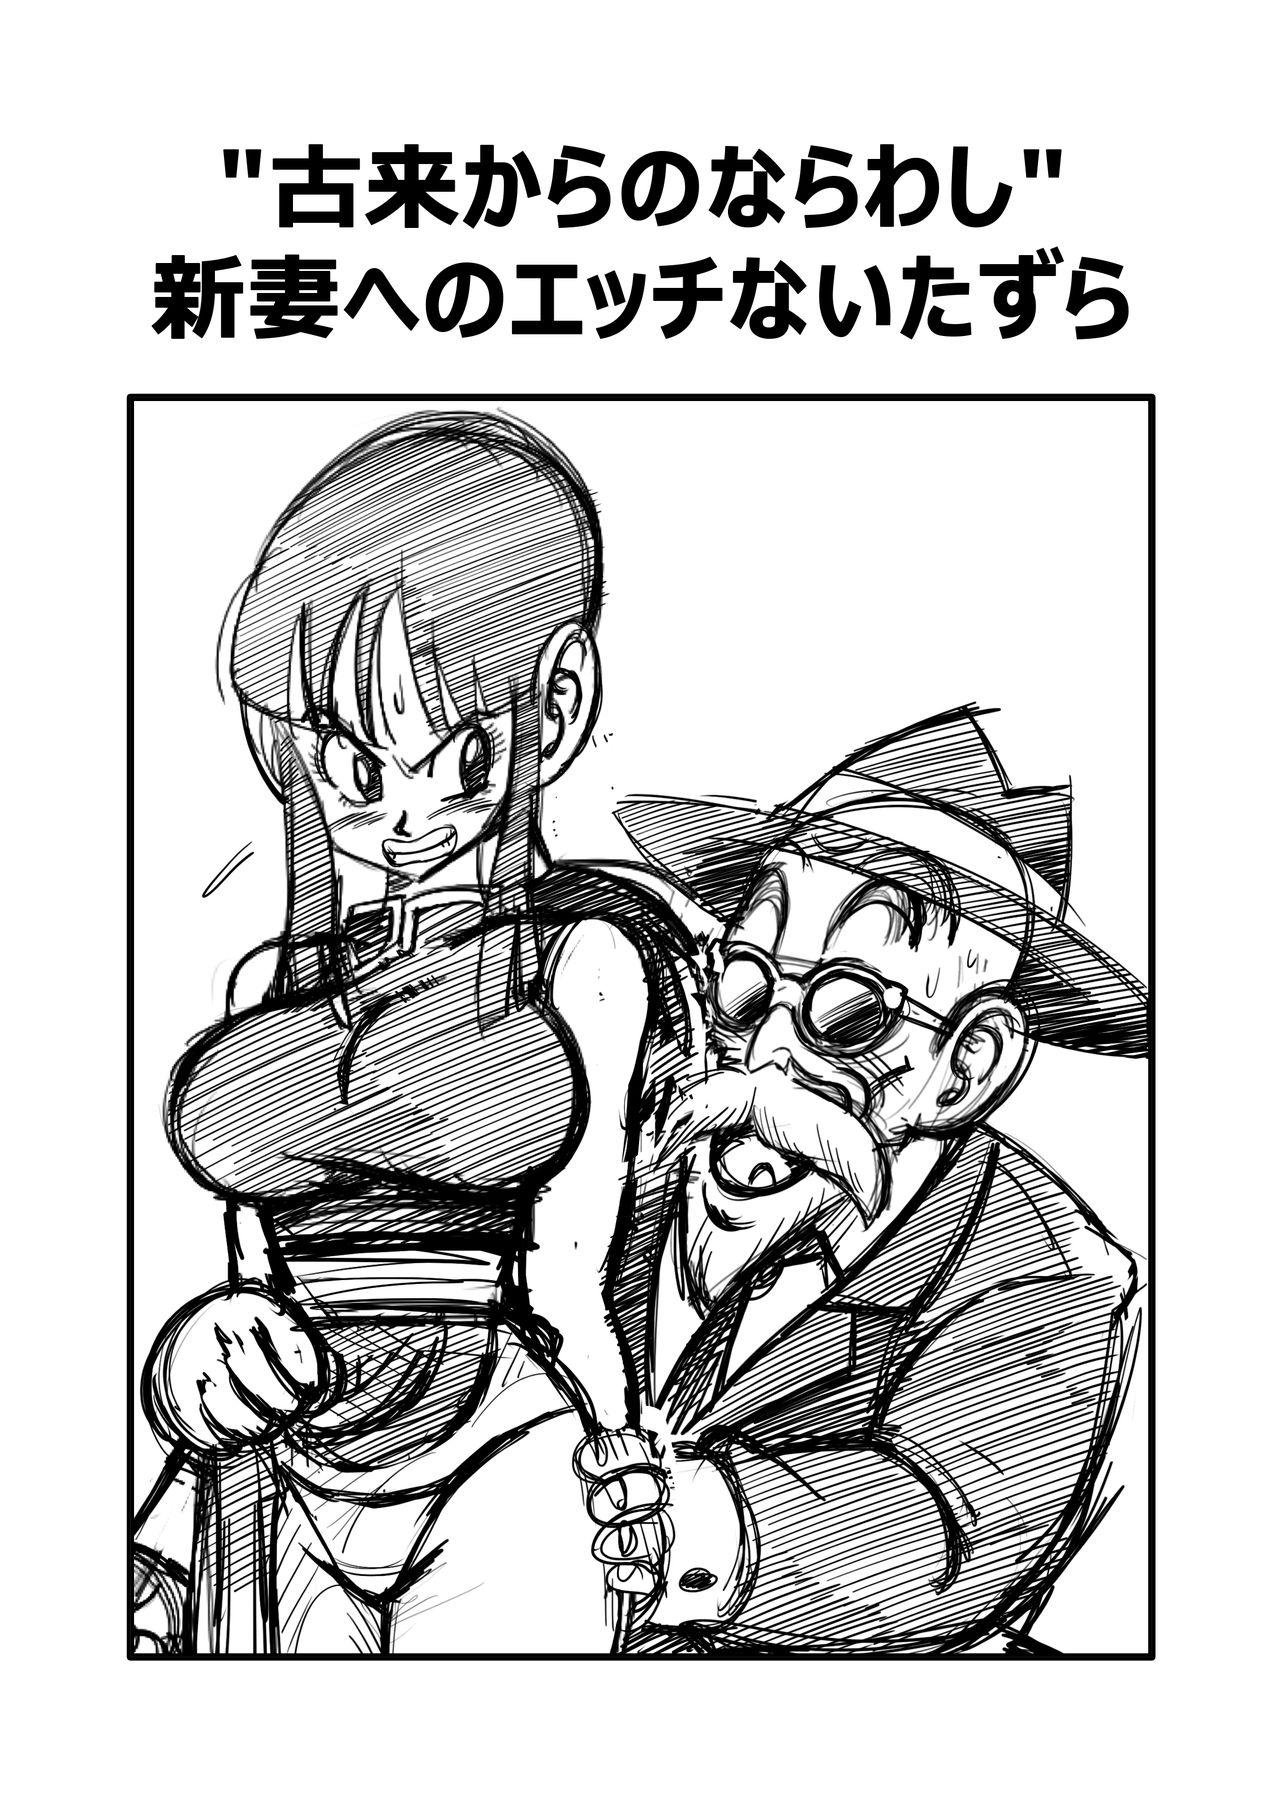 Dicks "An Ancient Tradition" - Young Wife is Harassed! - Dragon ball z Foot Fetish - Page 3